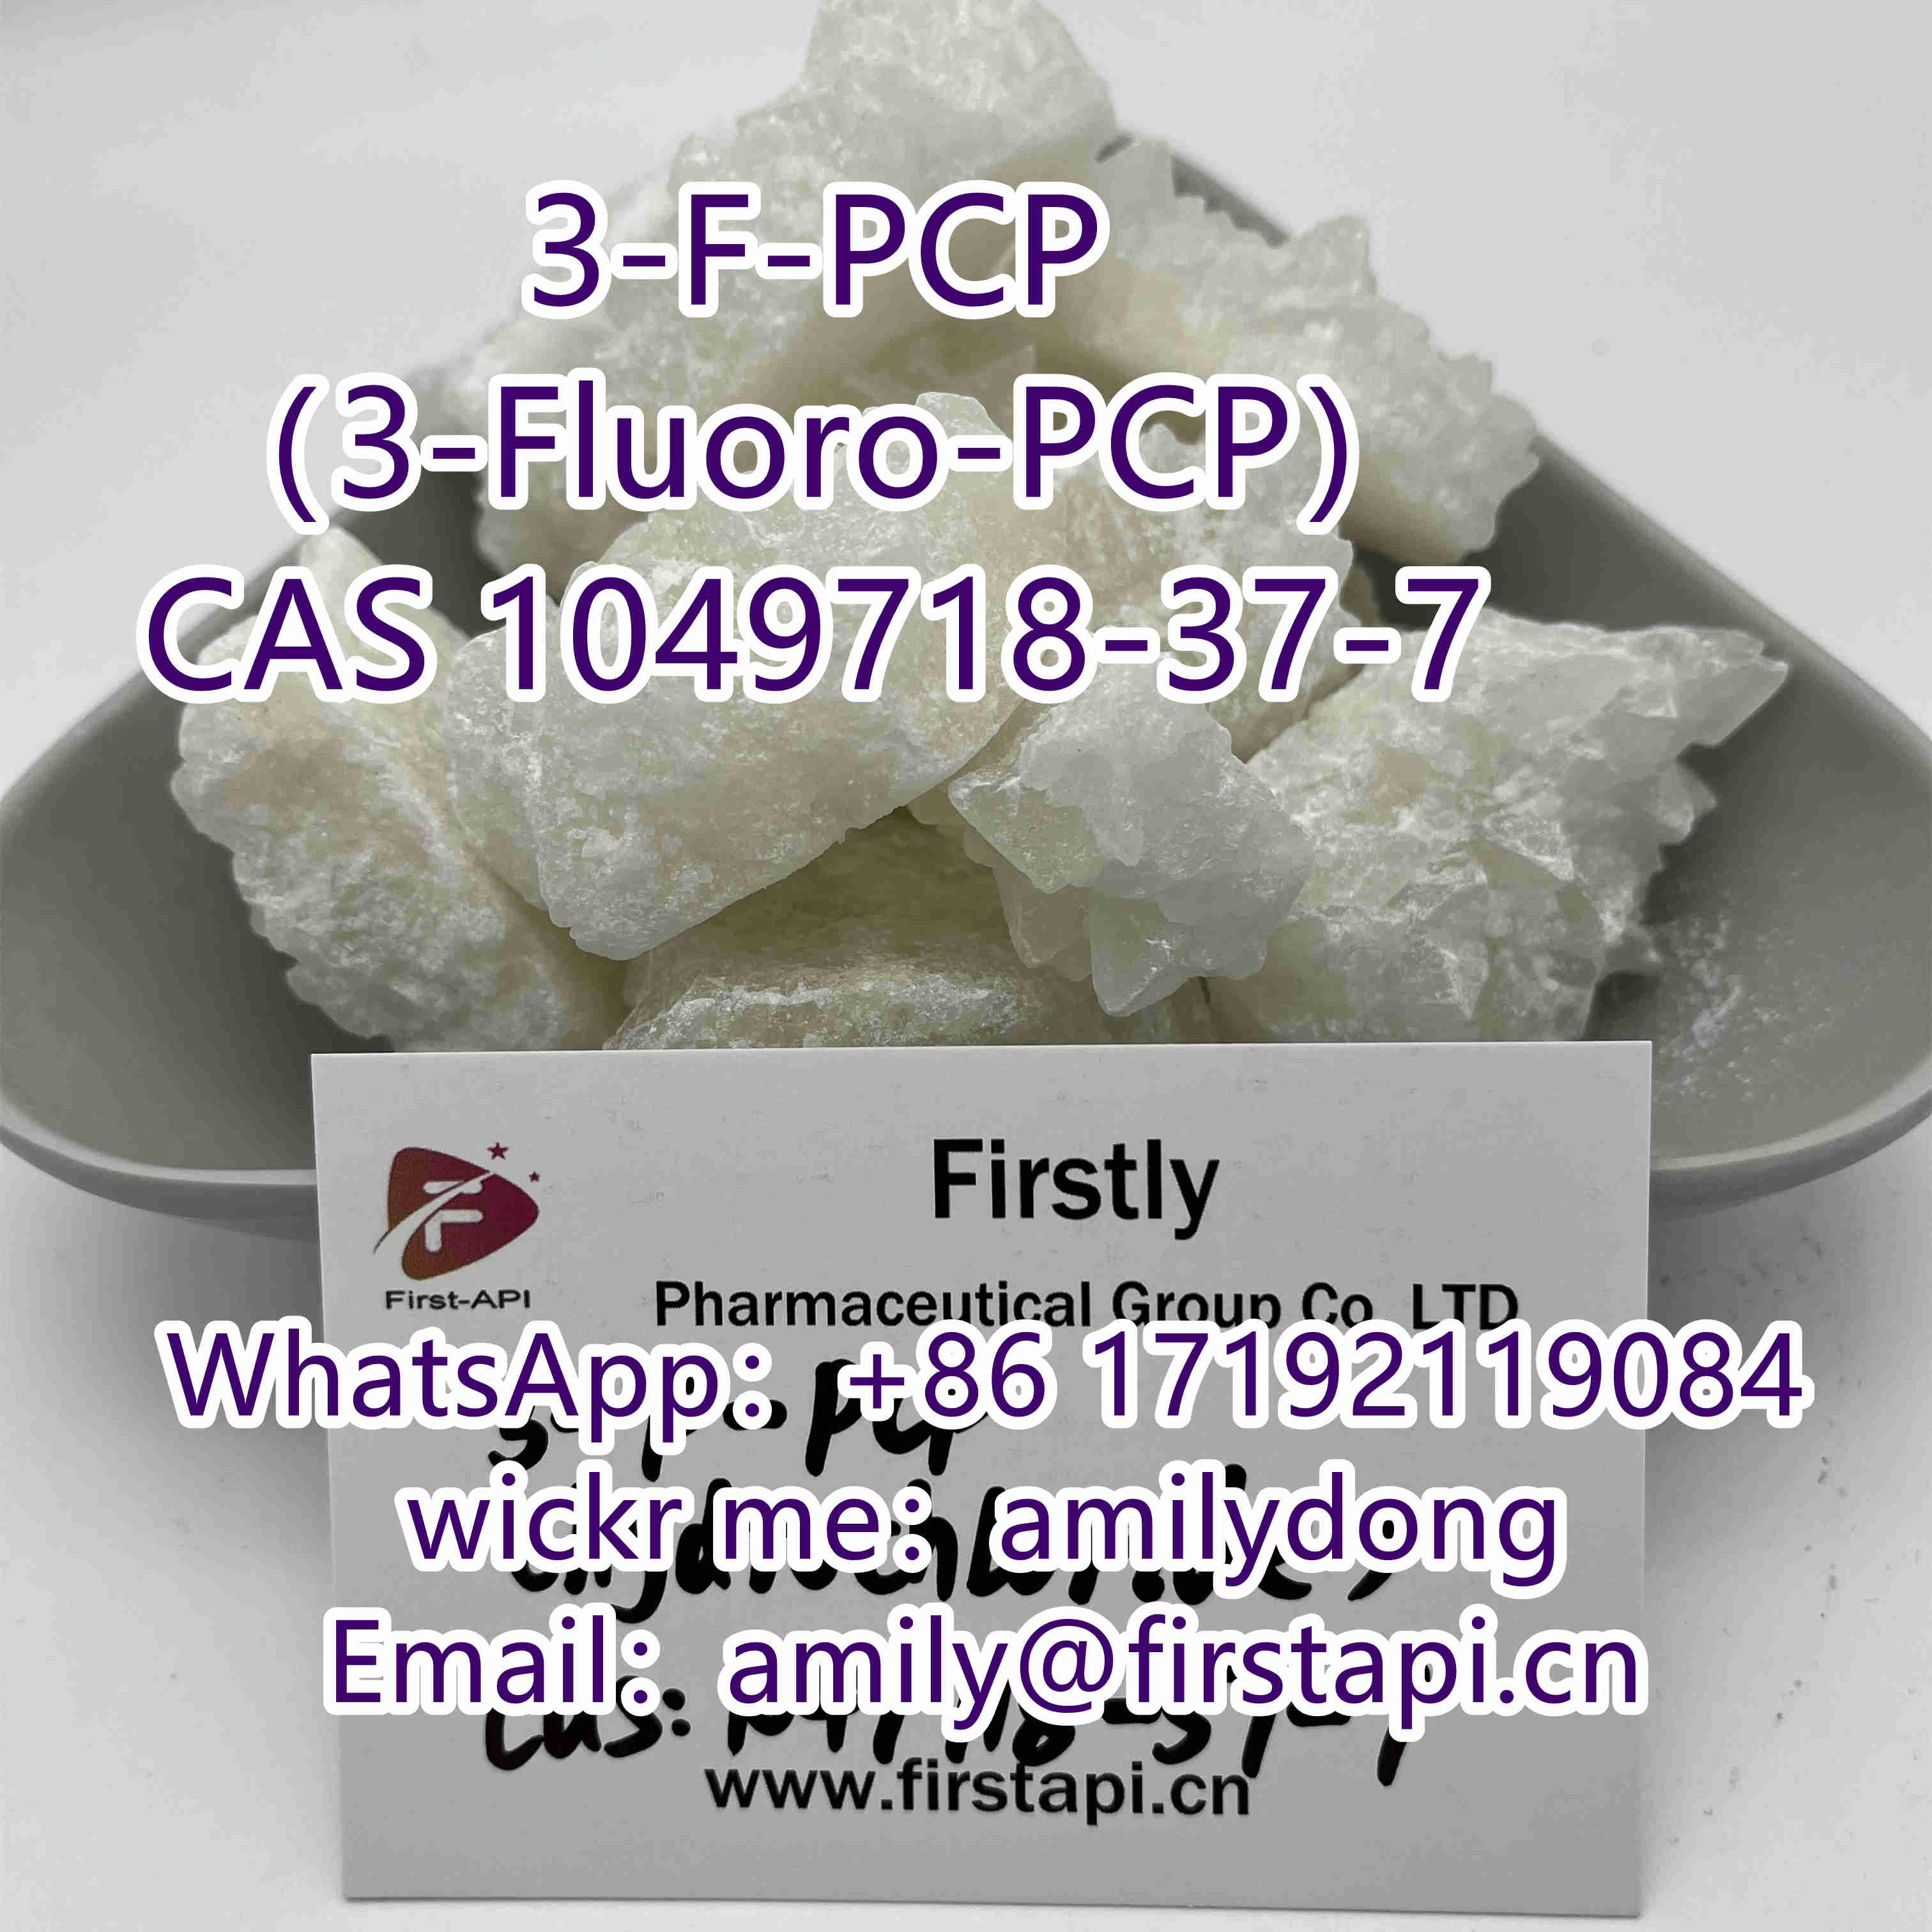 3-F-PCP （3-Fluoro-PCP）Chinese manufacturers CAS 1049718-37-7 - photo